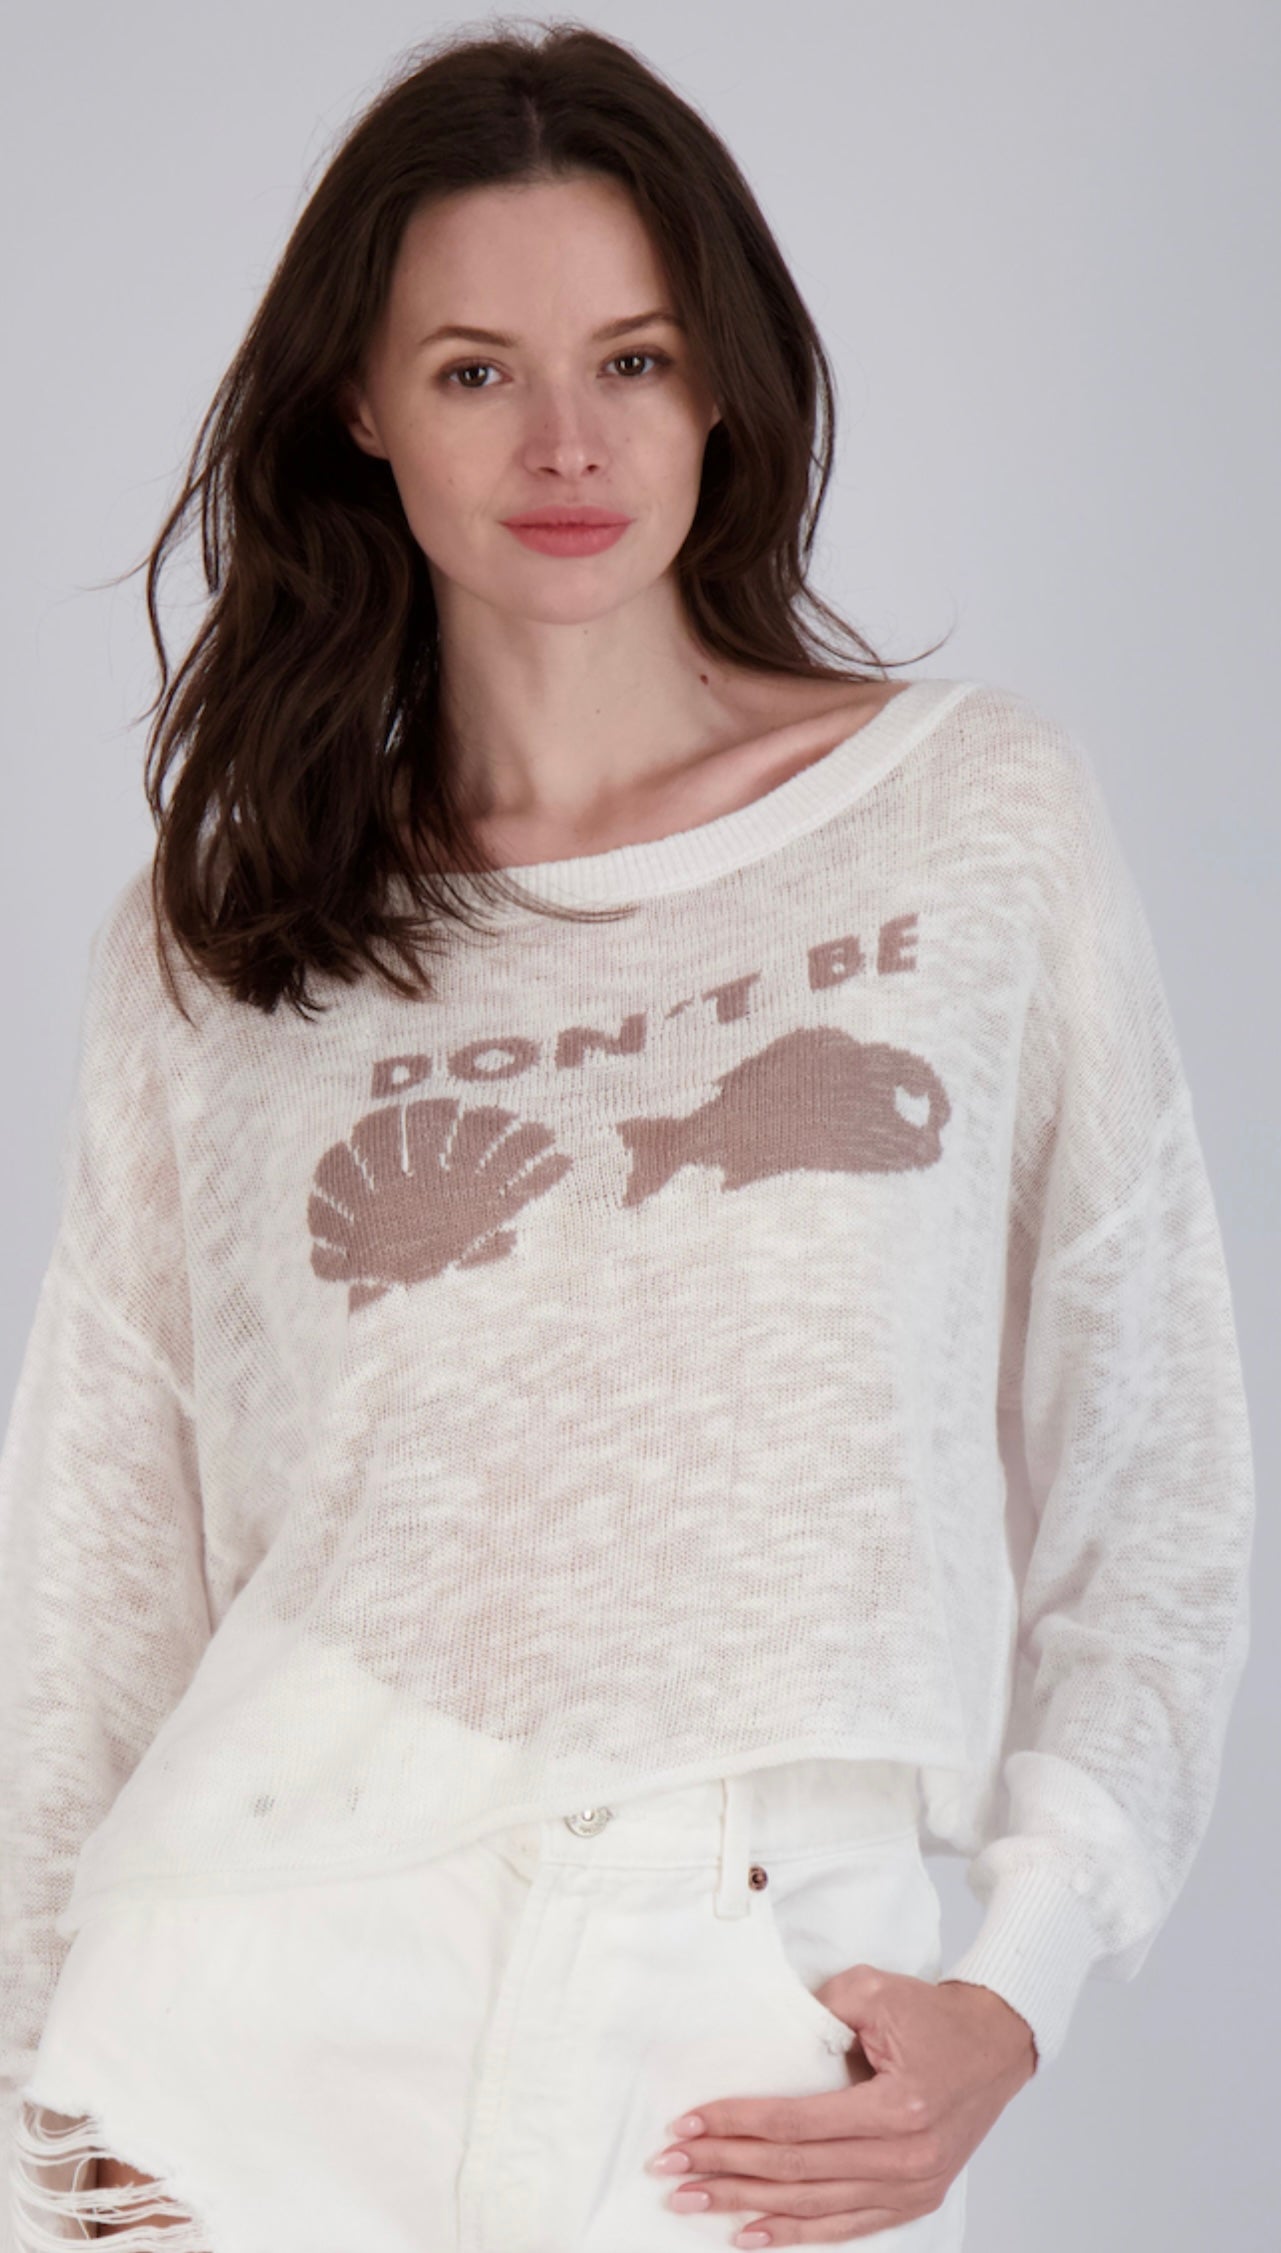 Don't Be Shell Fish Sweater